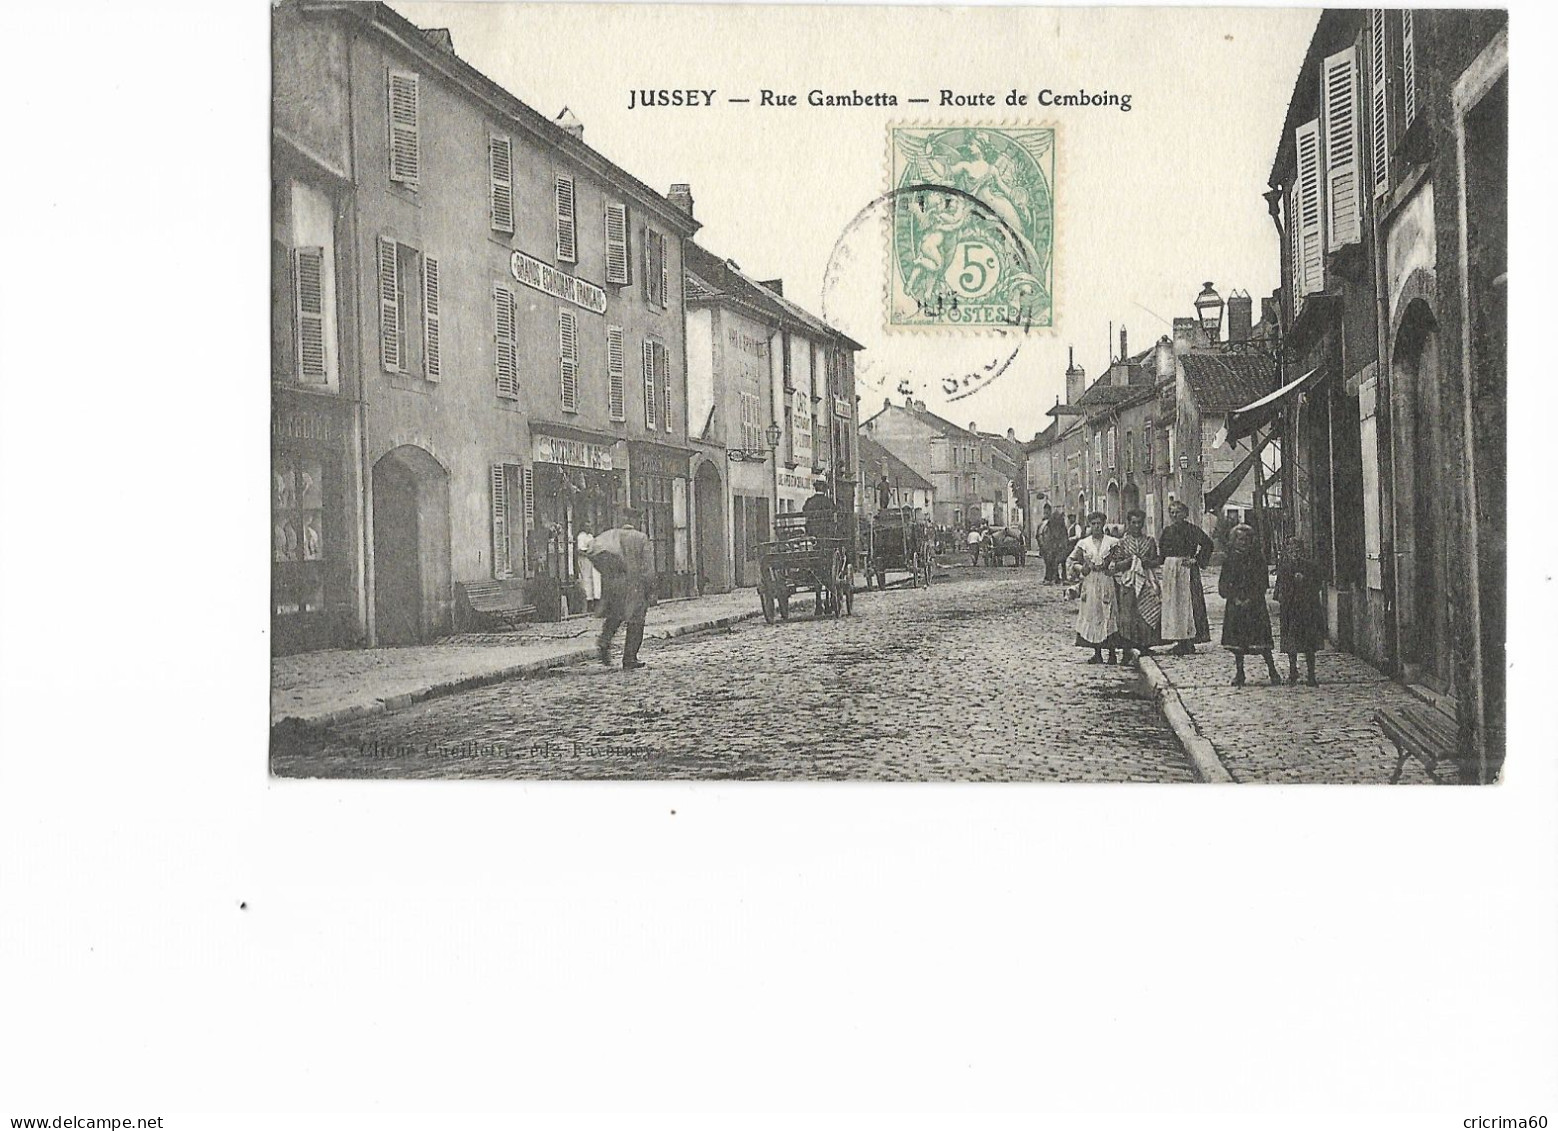 70 - JUSSEY - Rue Gambetta - Route De Cemboing. Belle Animation, CPA Ayant Circulé. BE. - Jussey